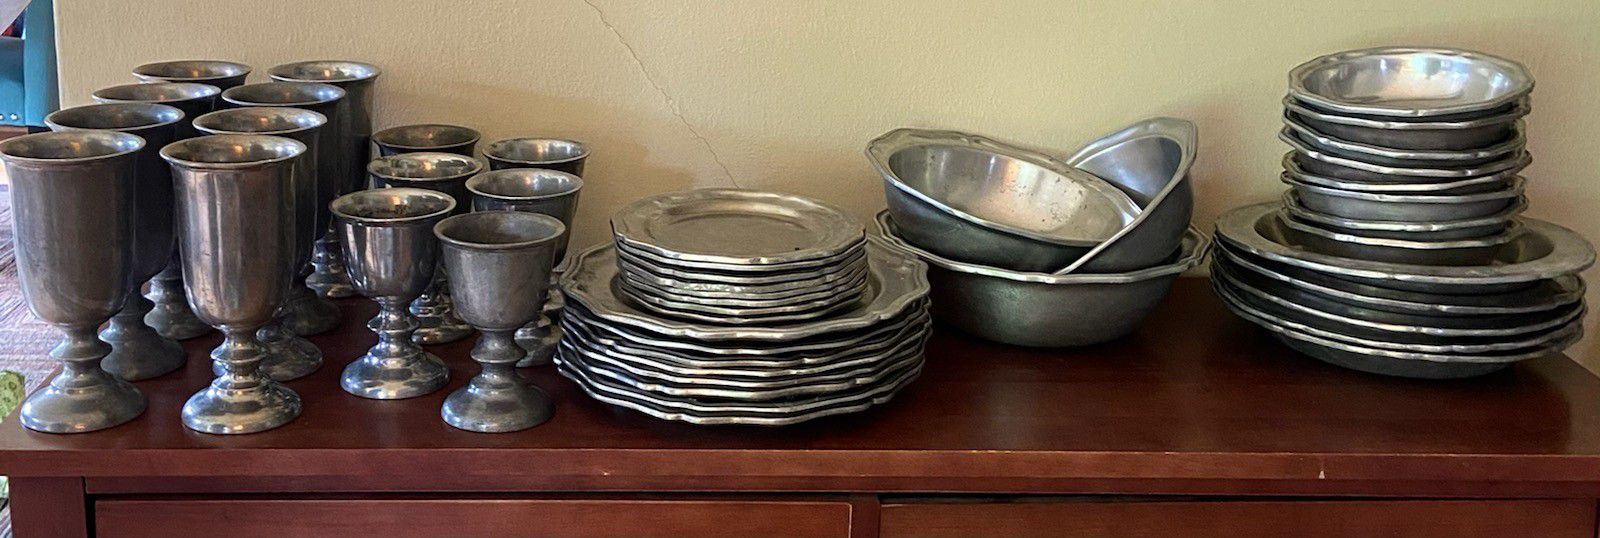 Wilton Queen Anne Armetale
and Duratale by Leonard Pewter Dishes